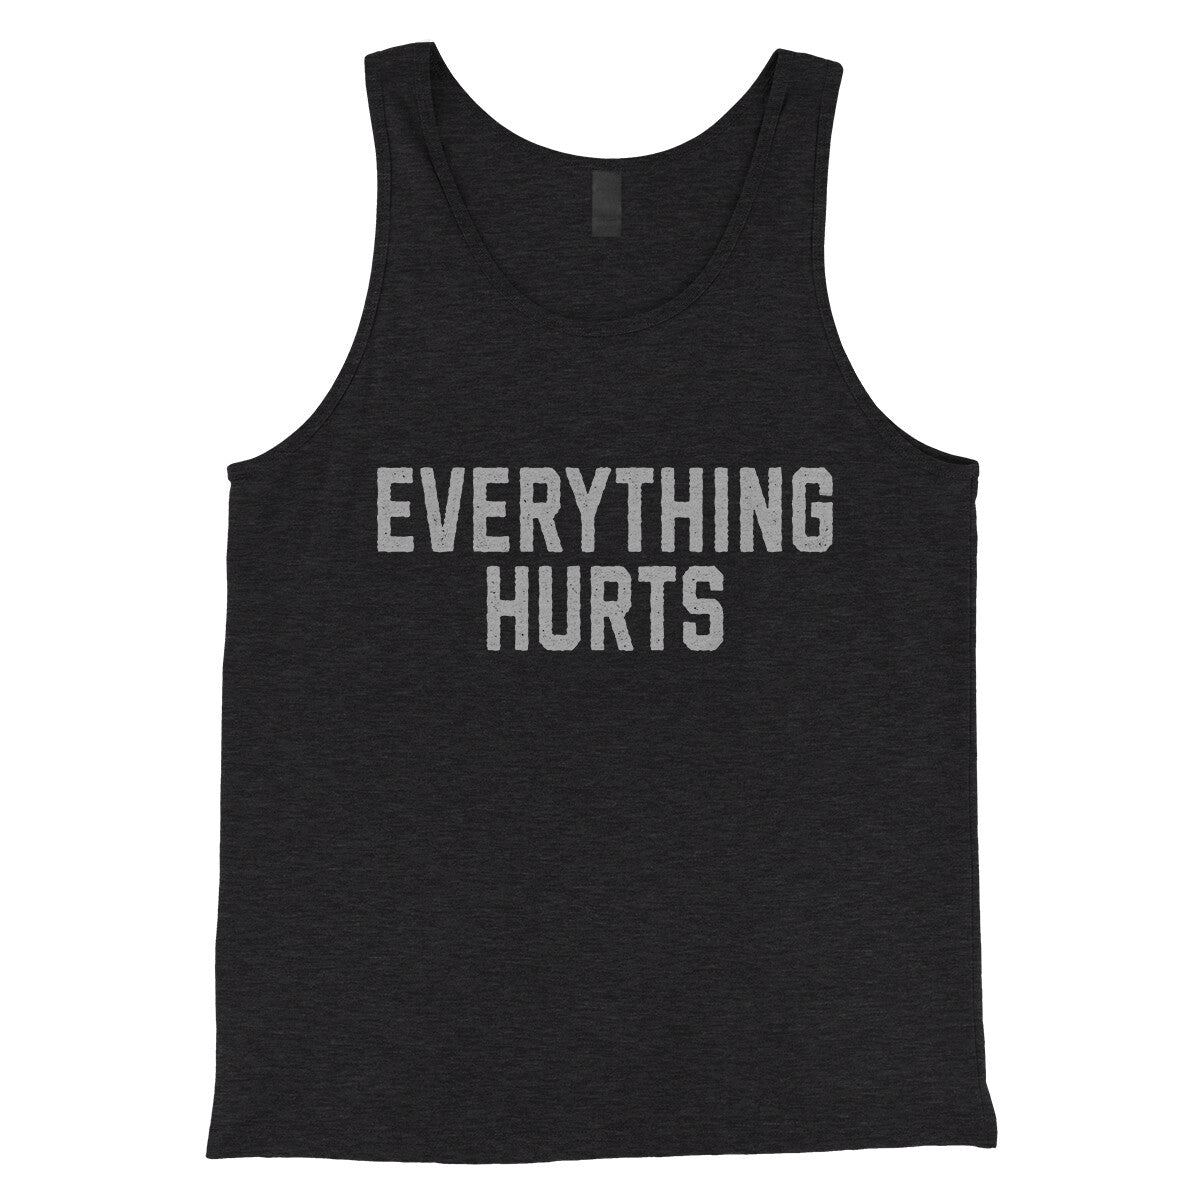 Everything Hurts in Charcoal Black TriBlend Color